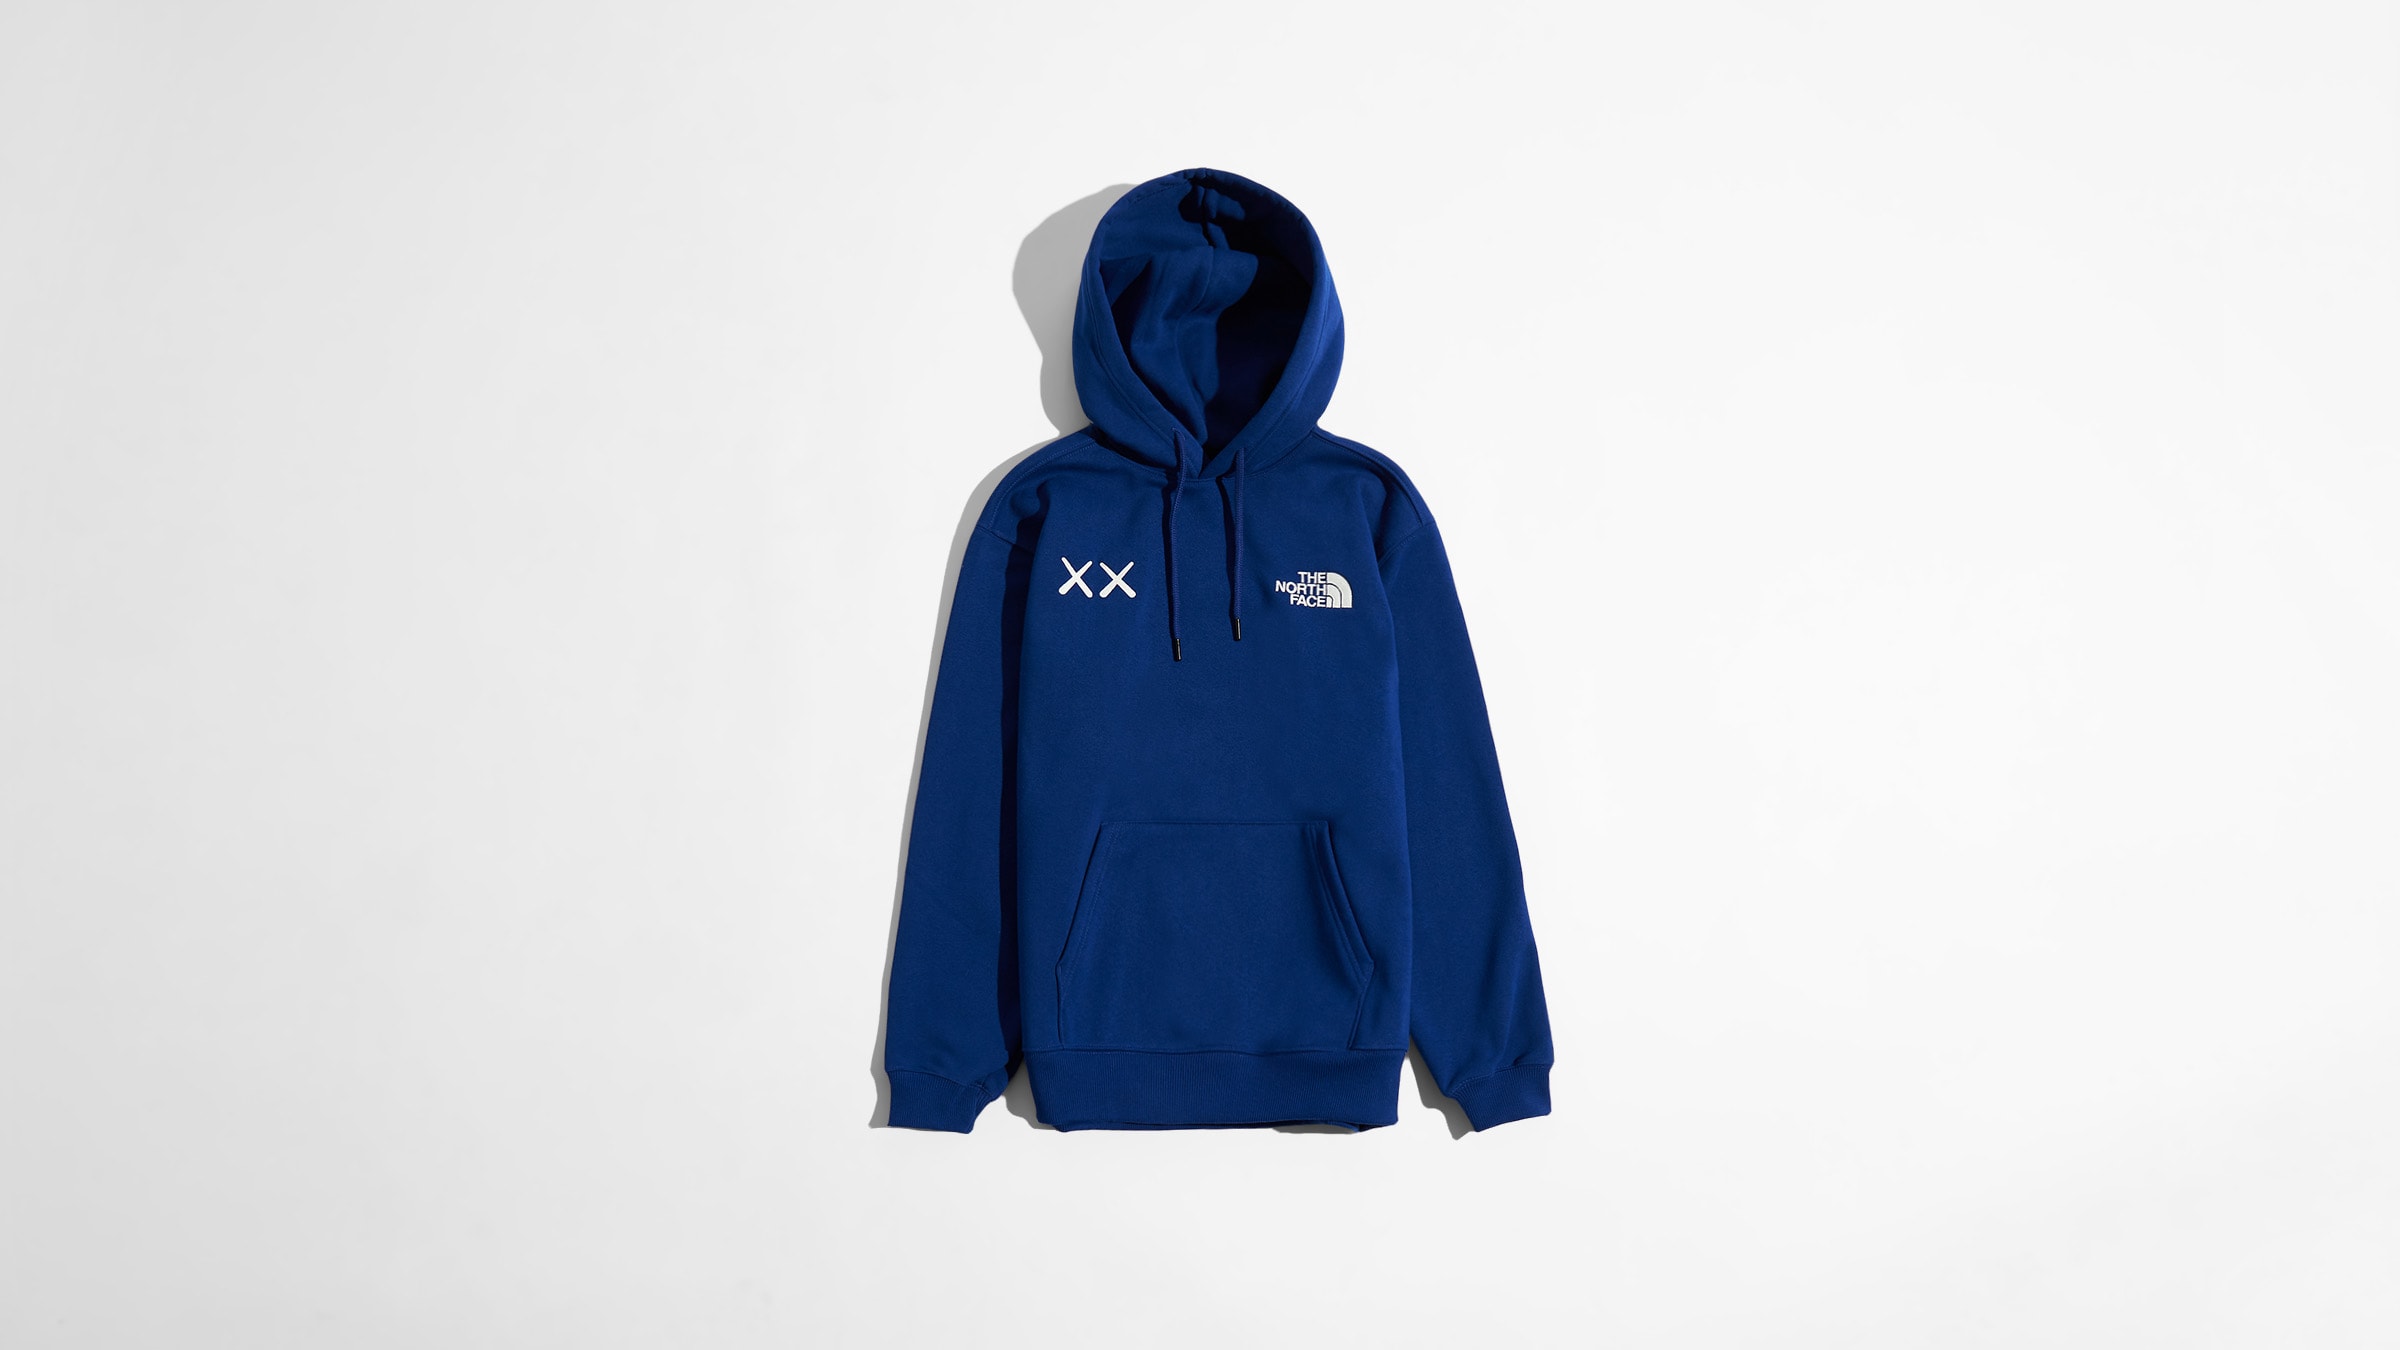 The North Face XX KAWS Popover Hoody (Bolt Blue) | END. Launches